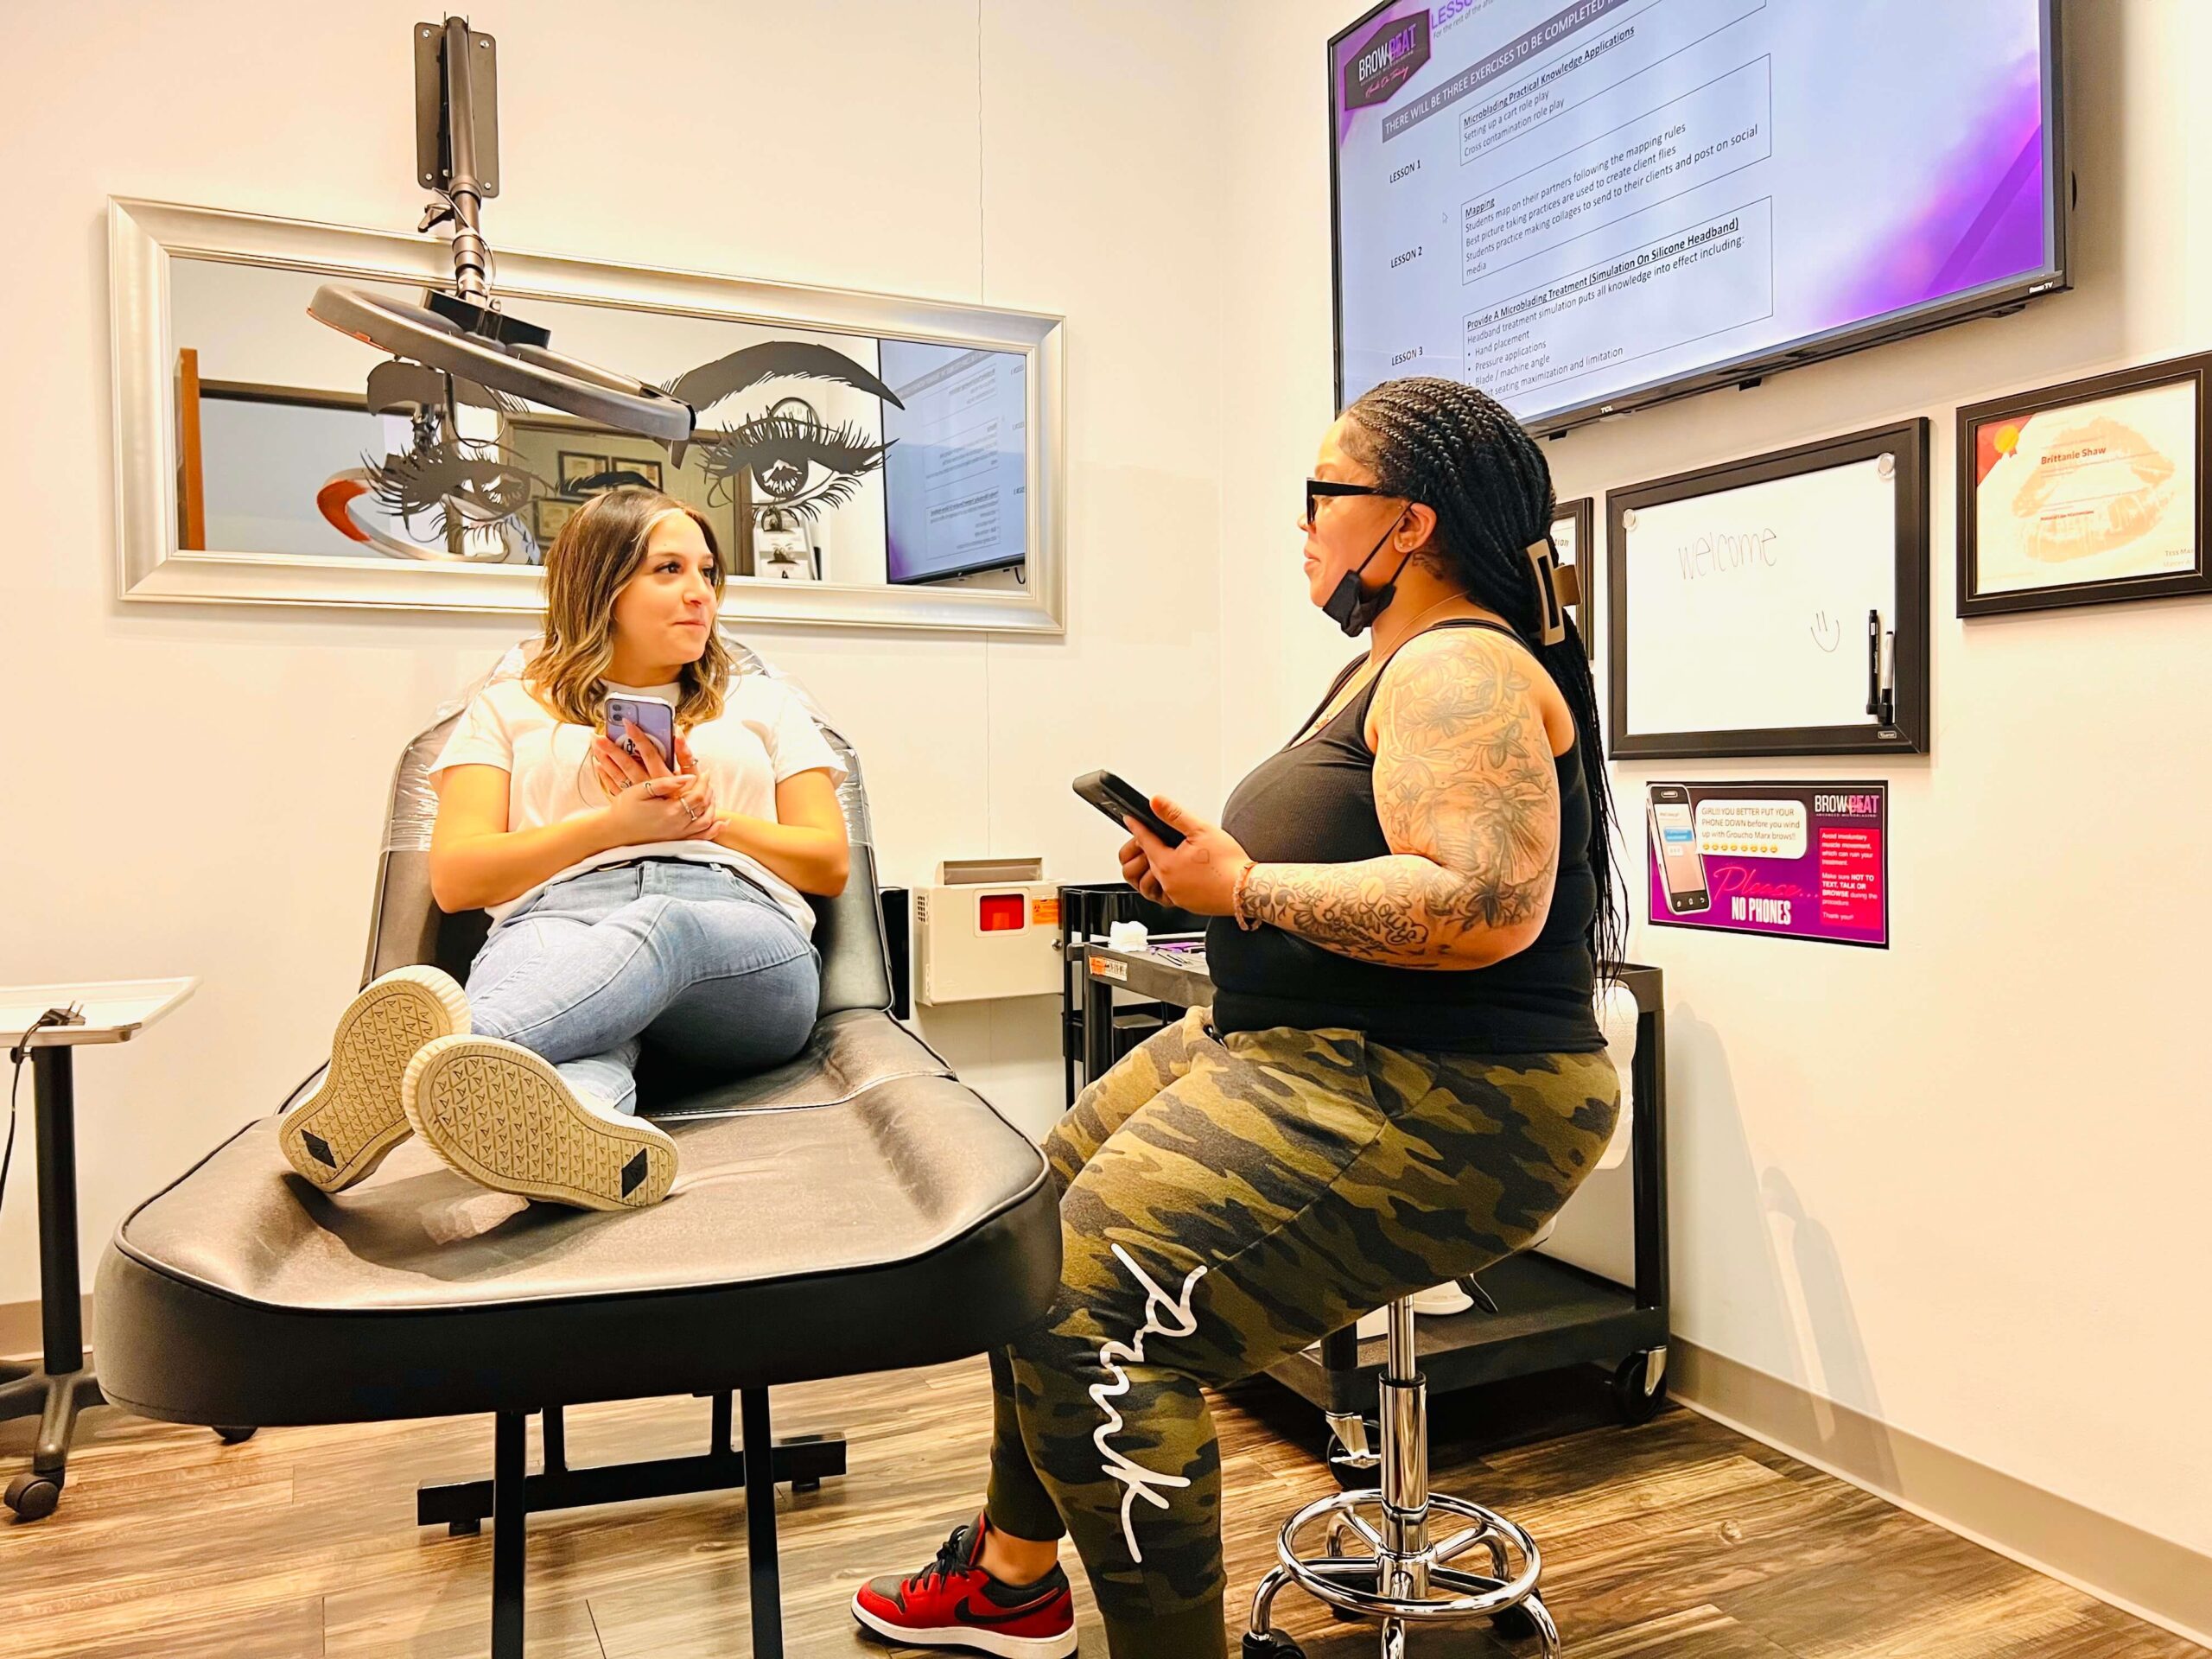 Complete Your Cosmetic Tattoo Supplies With These 8 Quick Tips – BrowBeat  Studio ™ Dallas, Microblading Certification and Training Academy